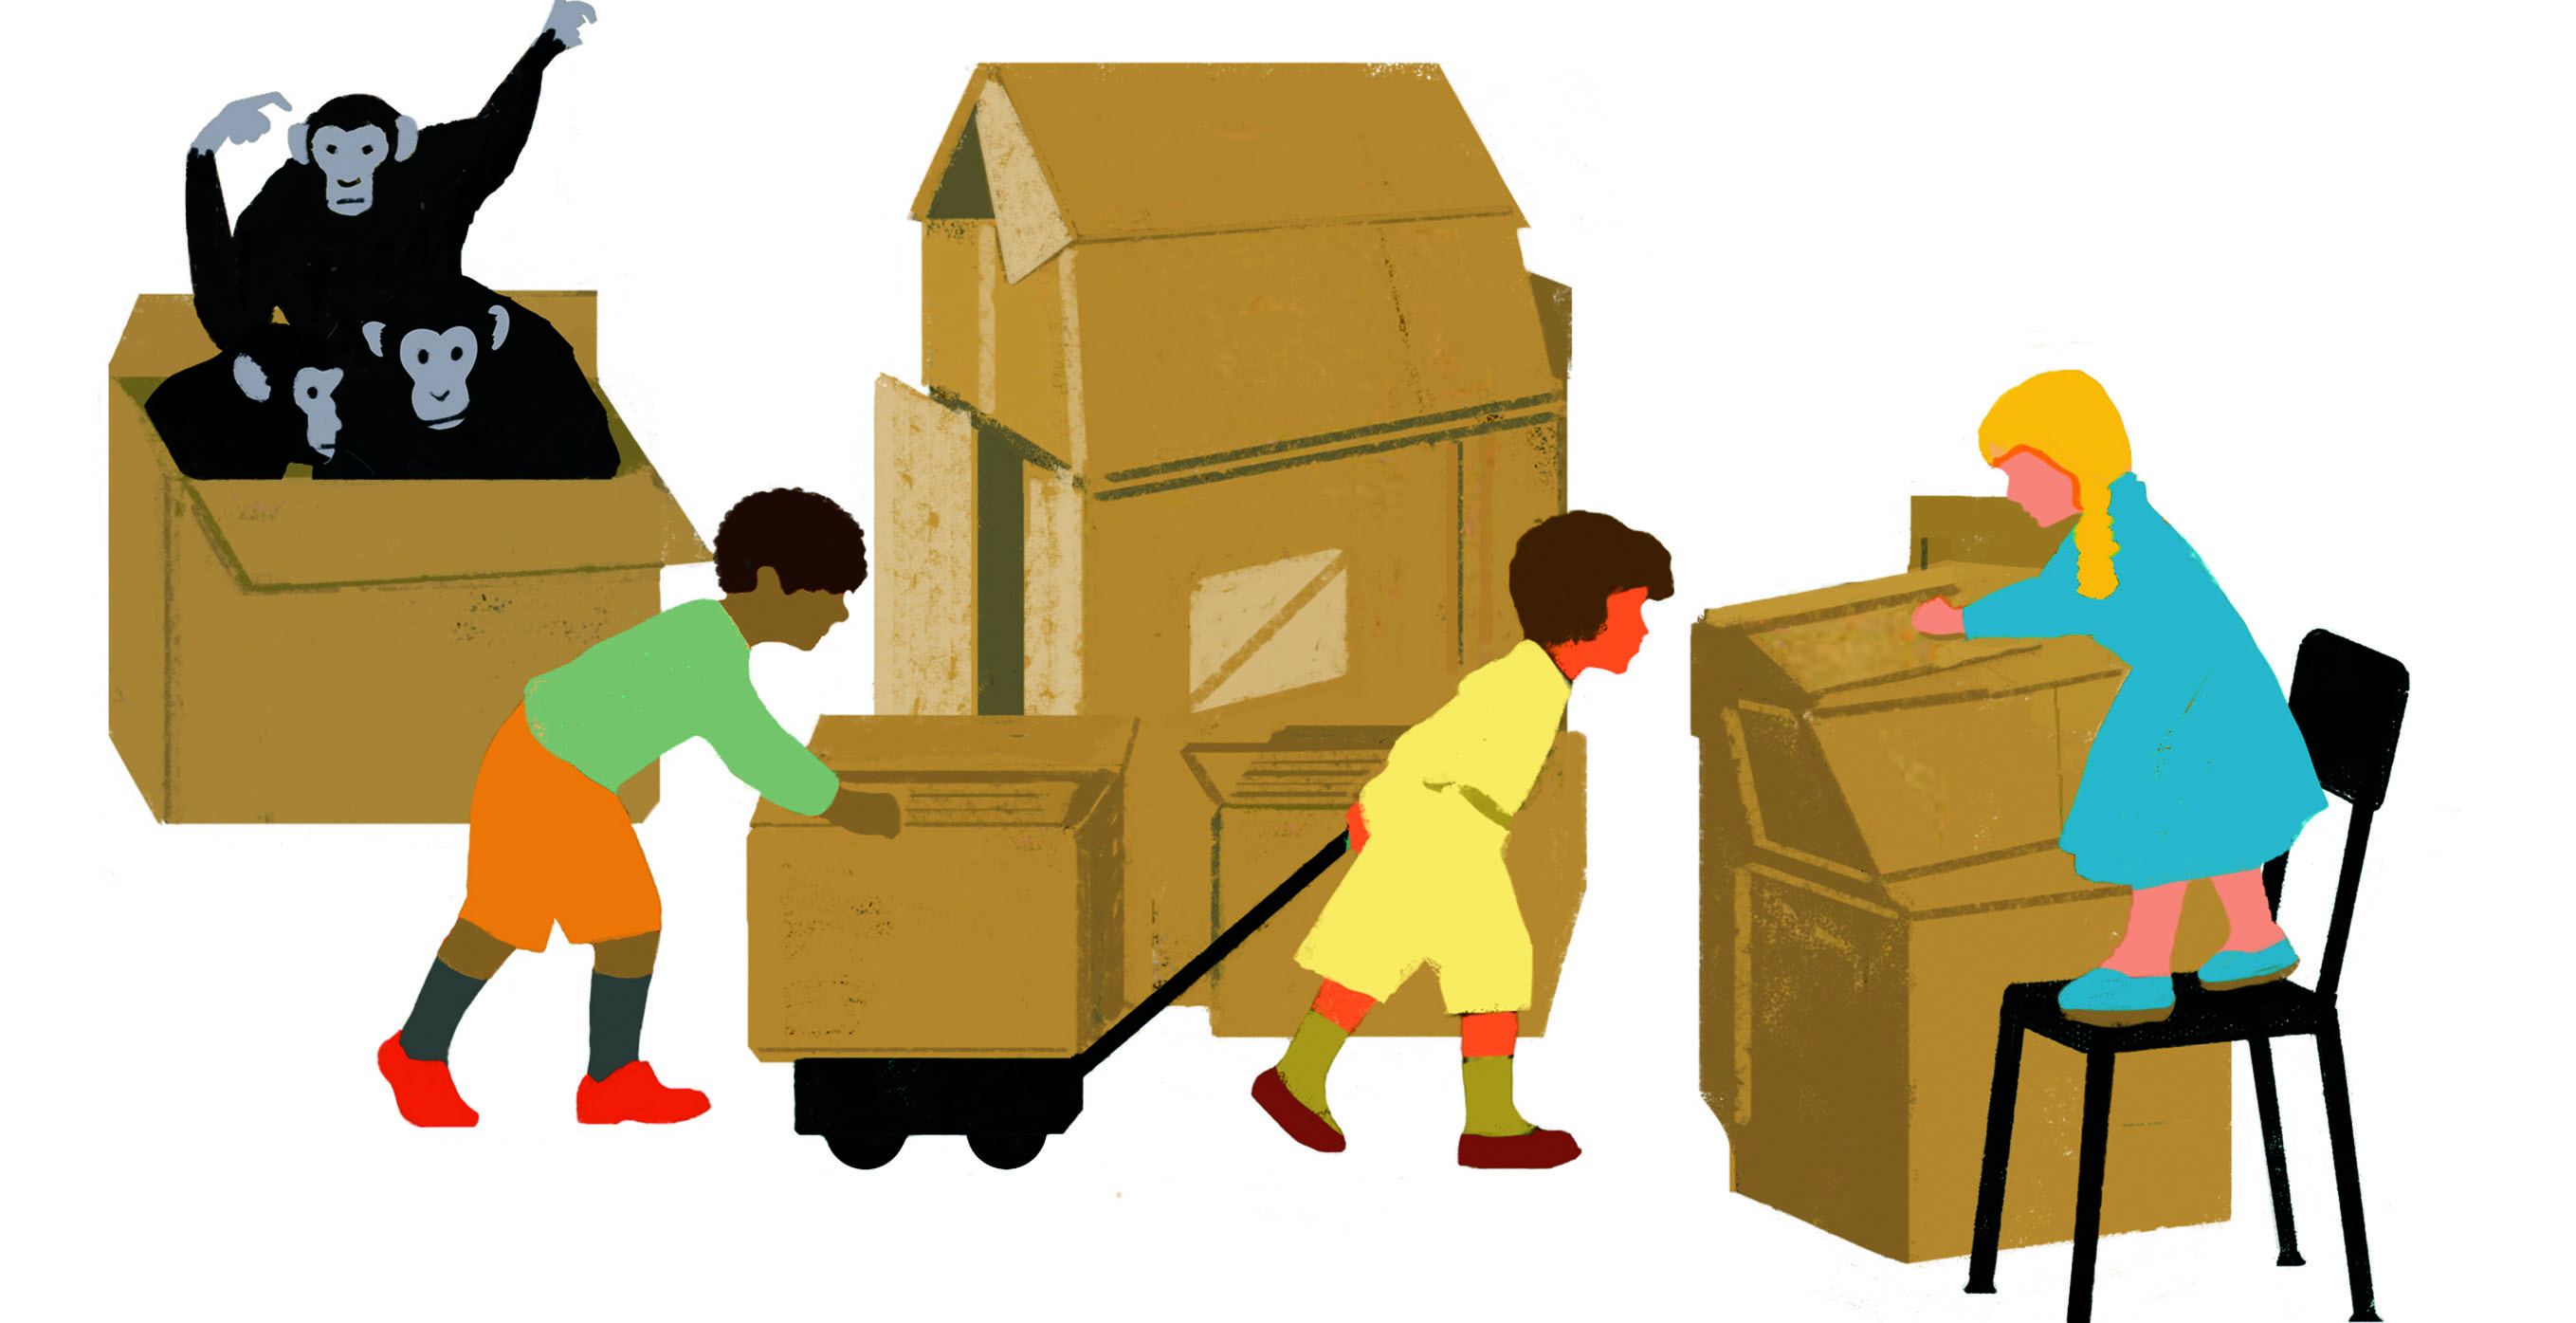 Image of children building a house of cardboard while monkeys place in box